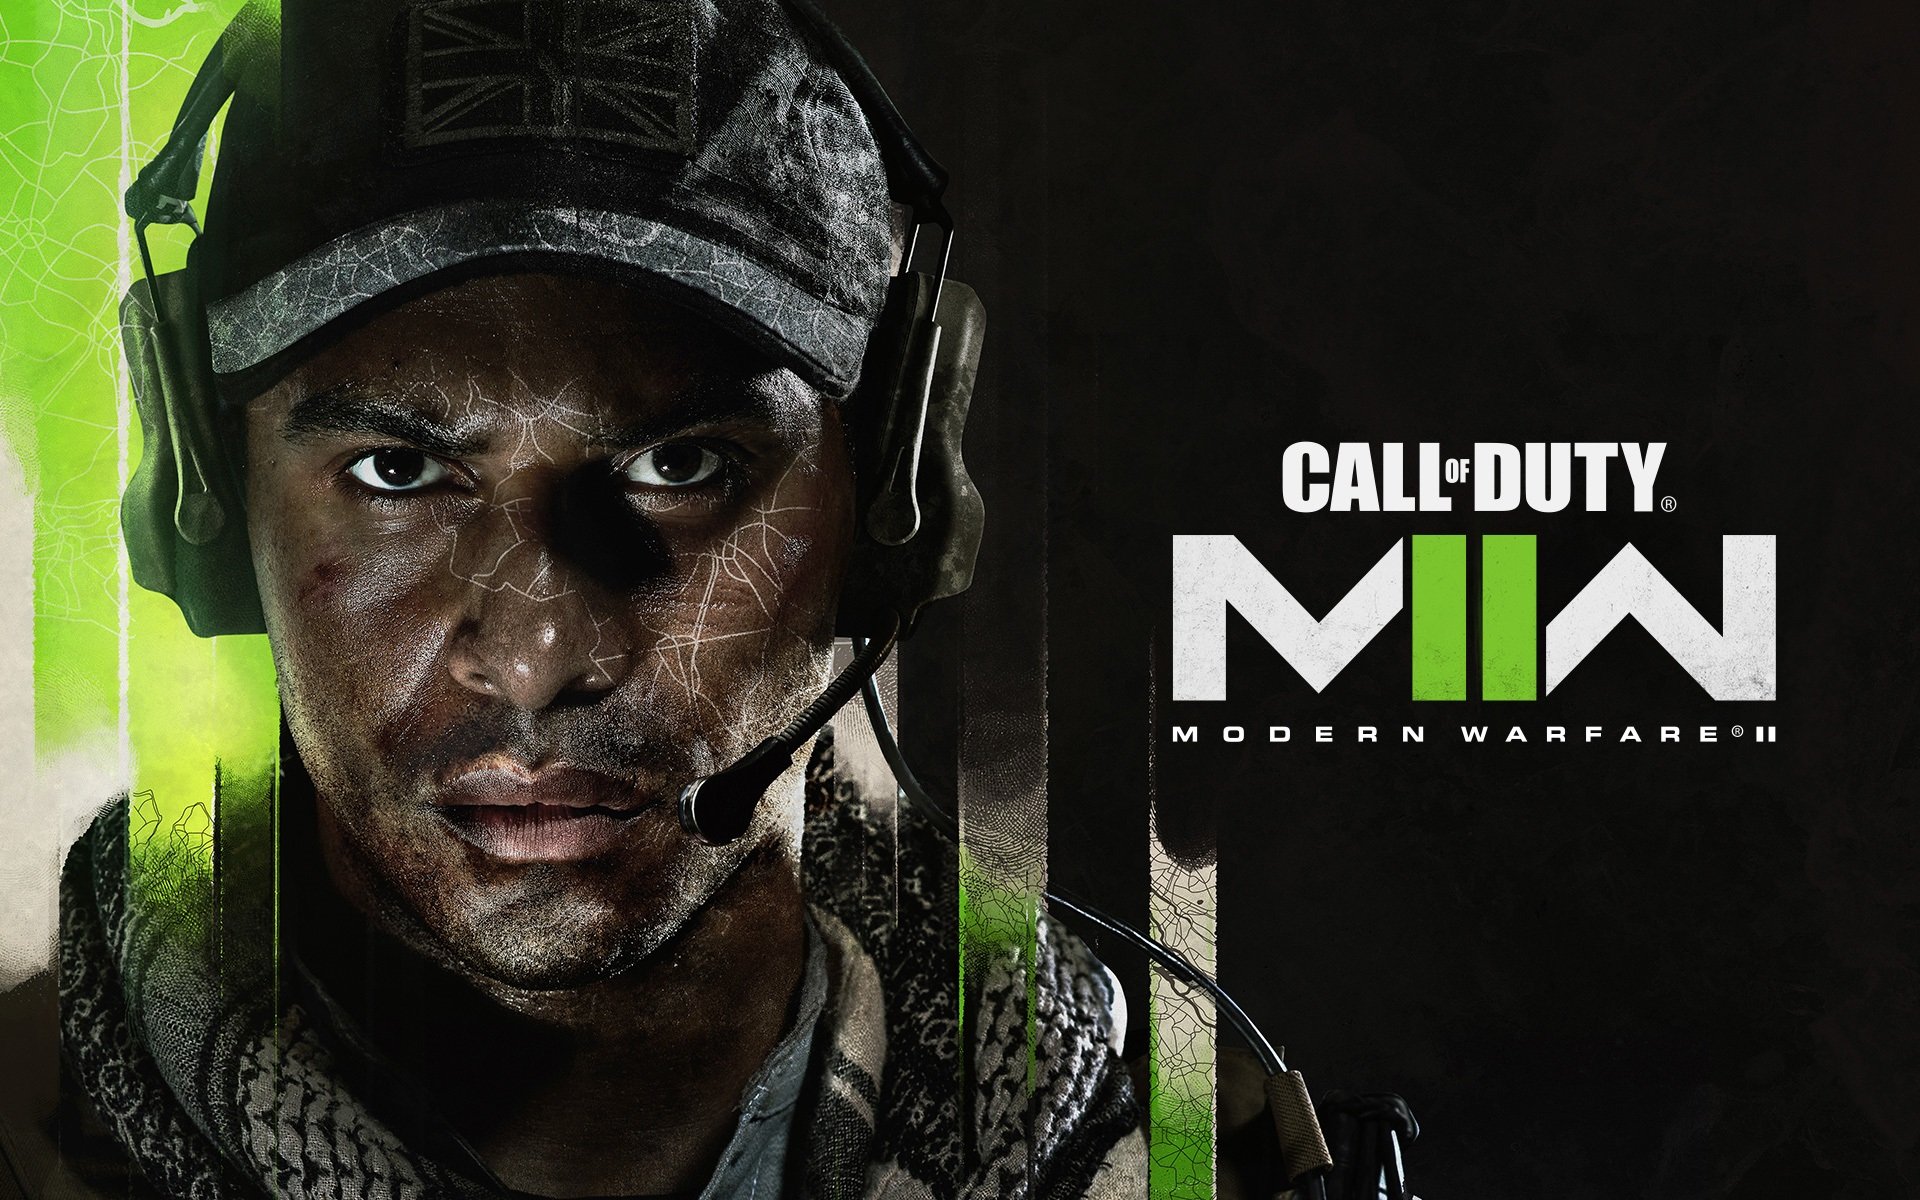 Call of Duty Modern Warfare 2 release date and starring characters  confirmed